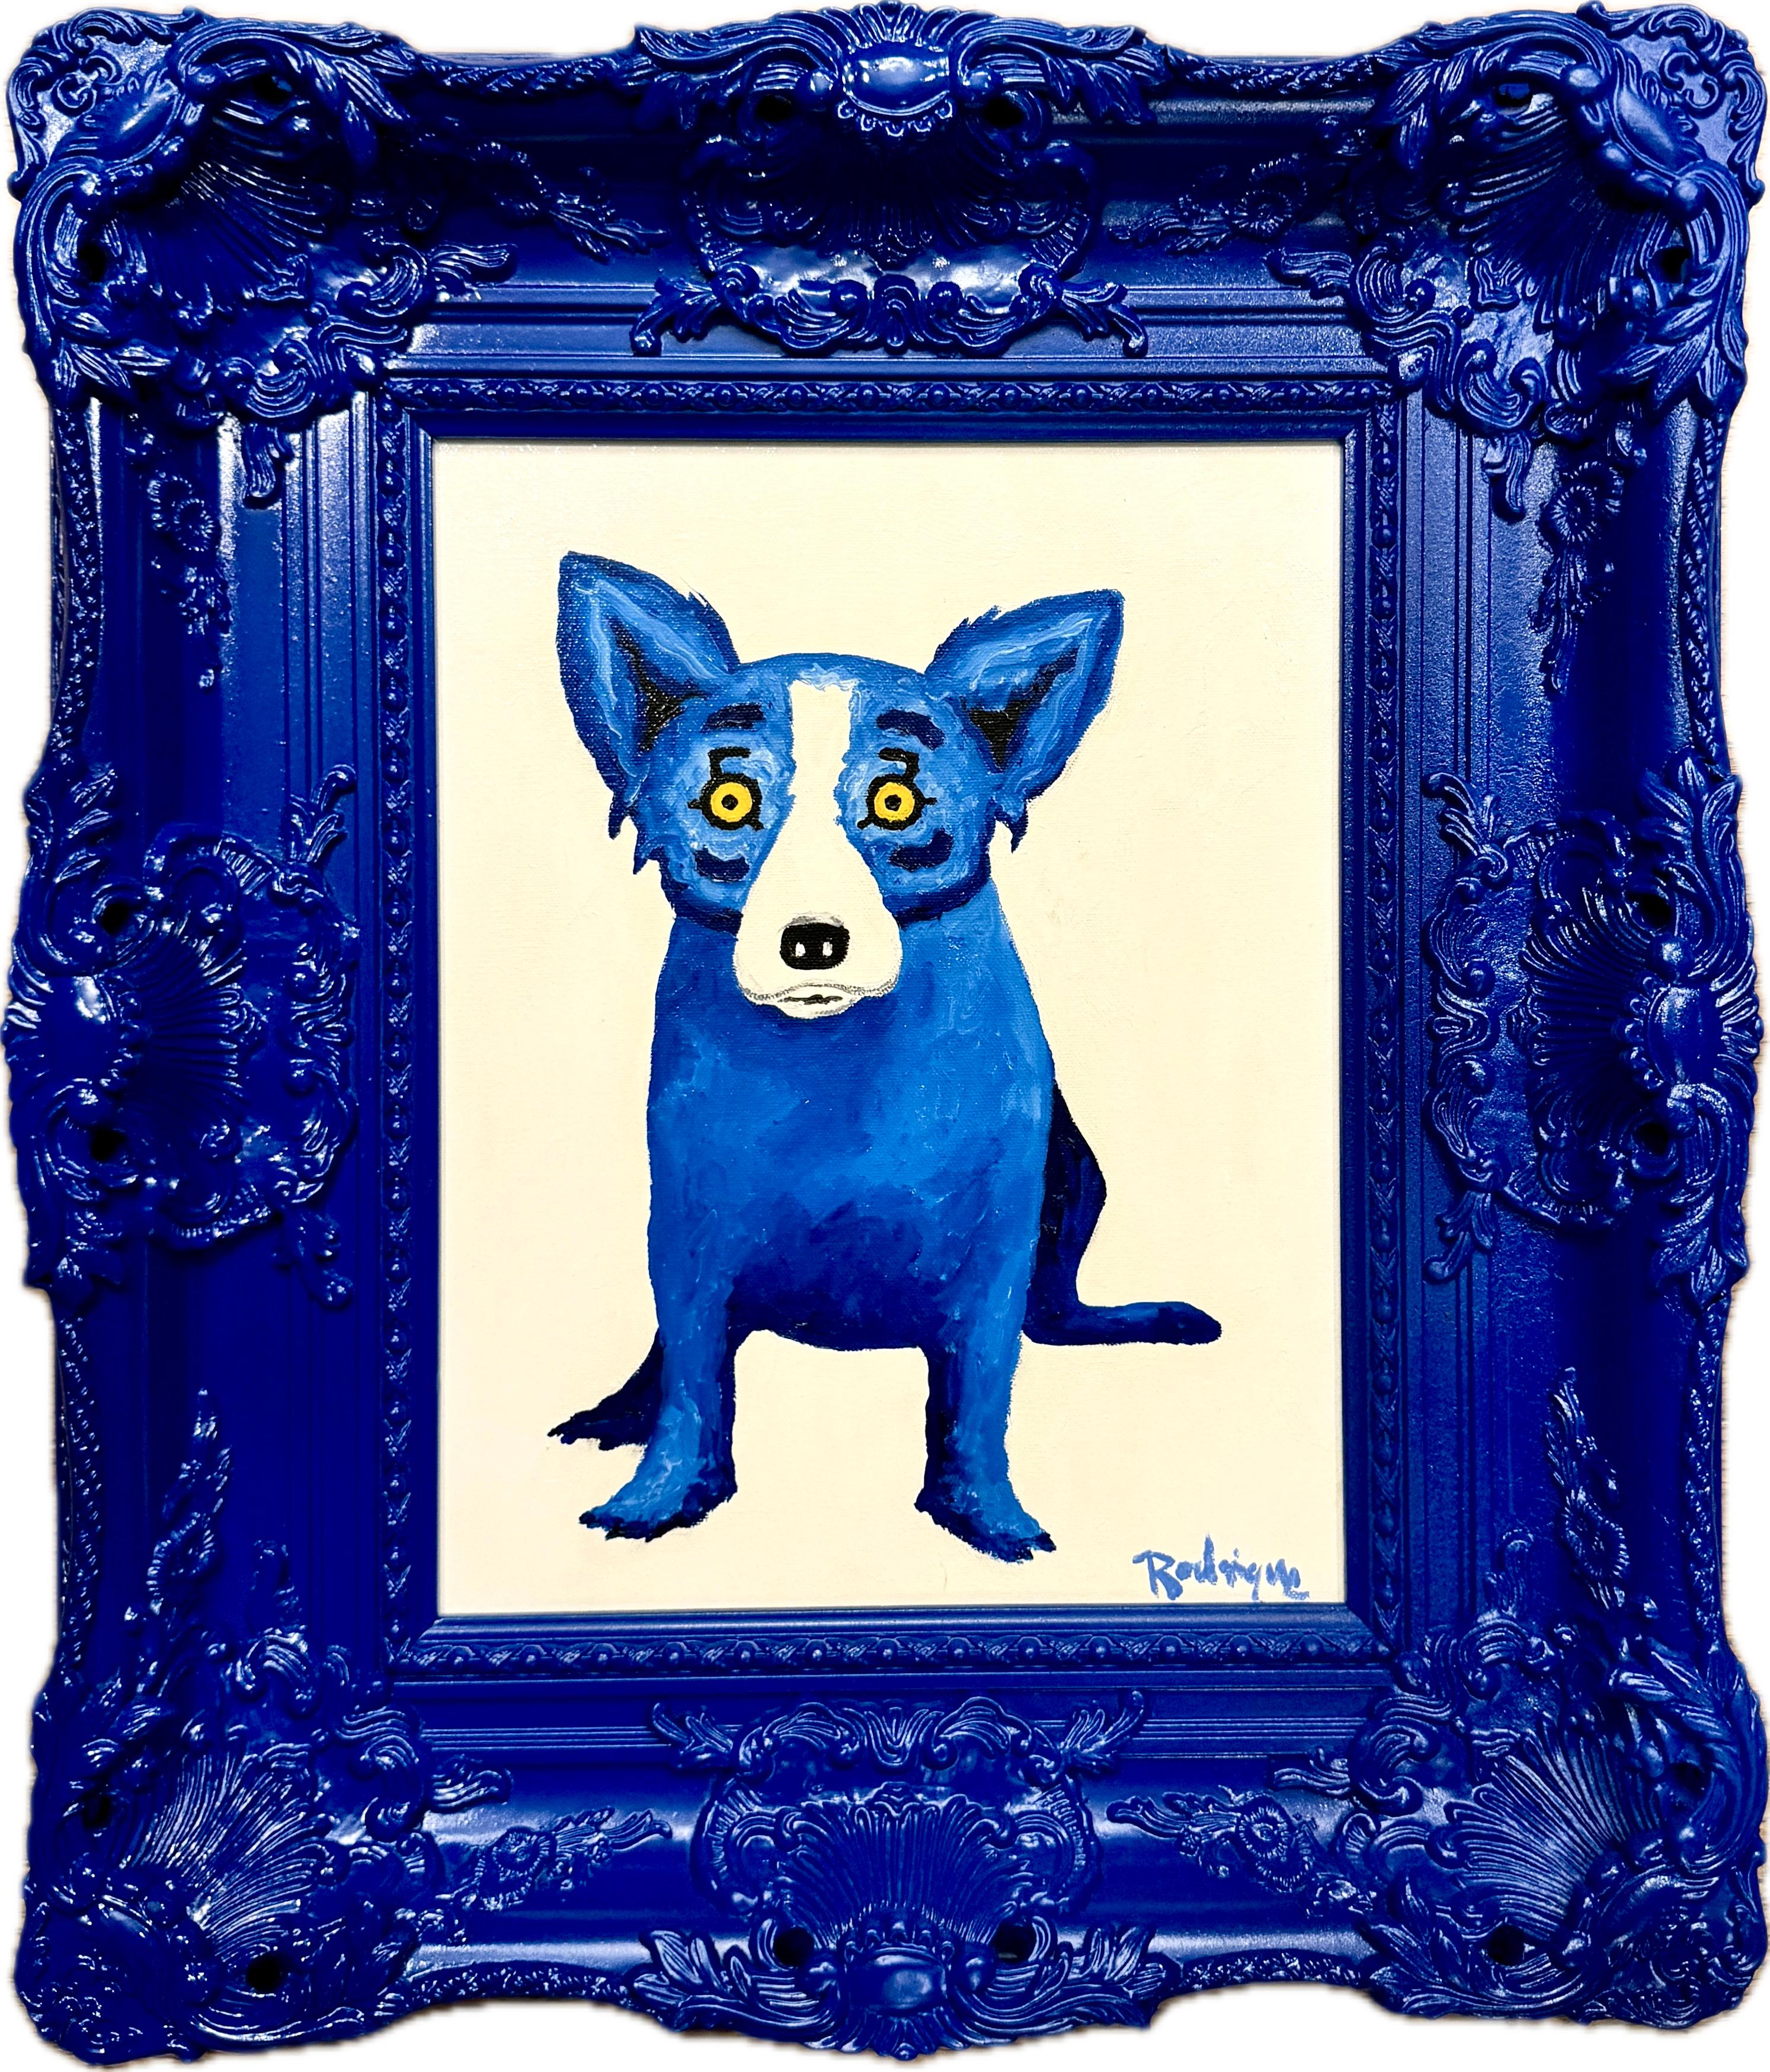 What is George Rodrigue’s art style?